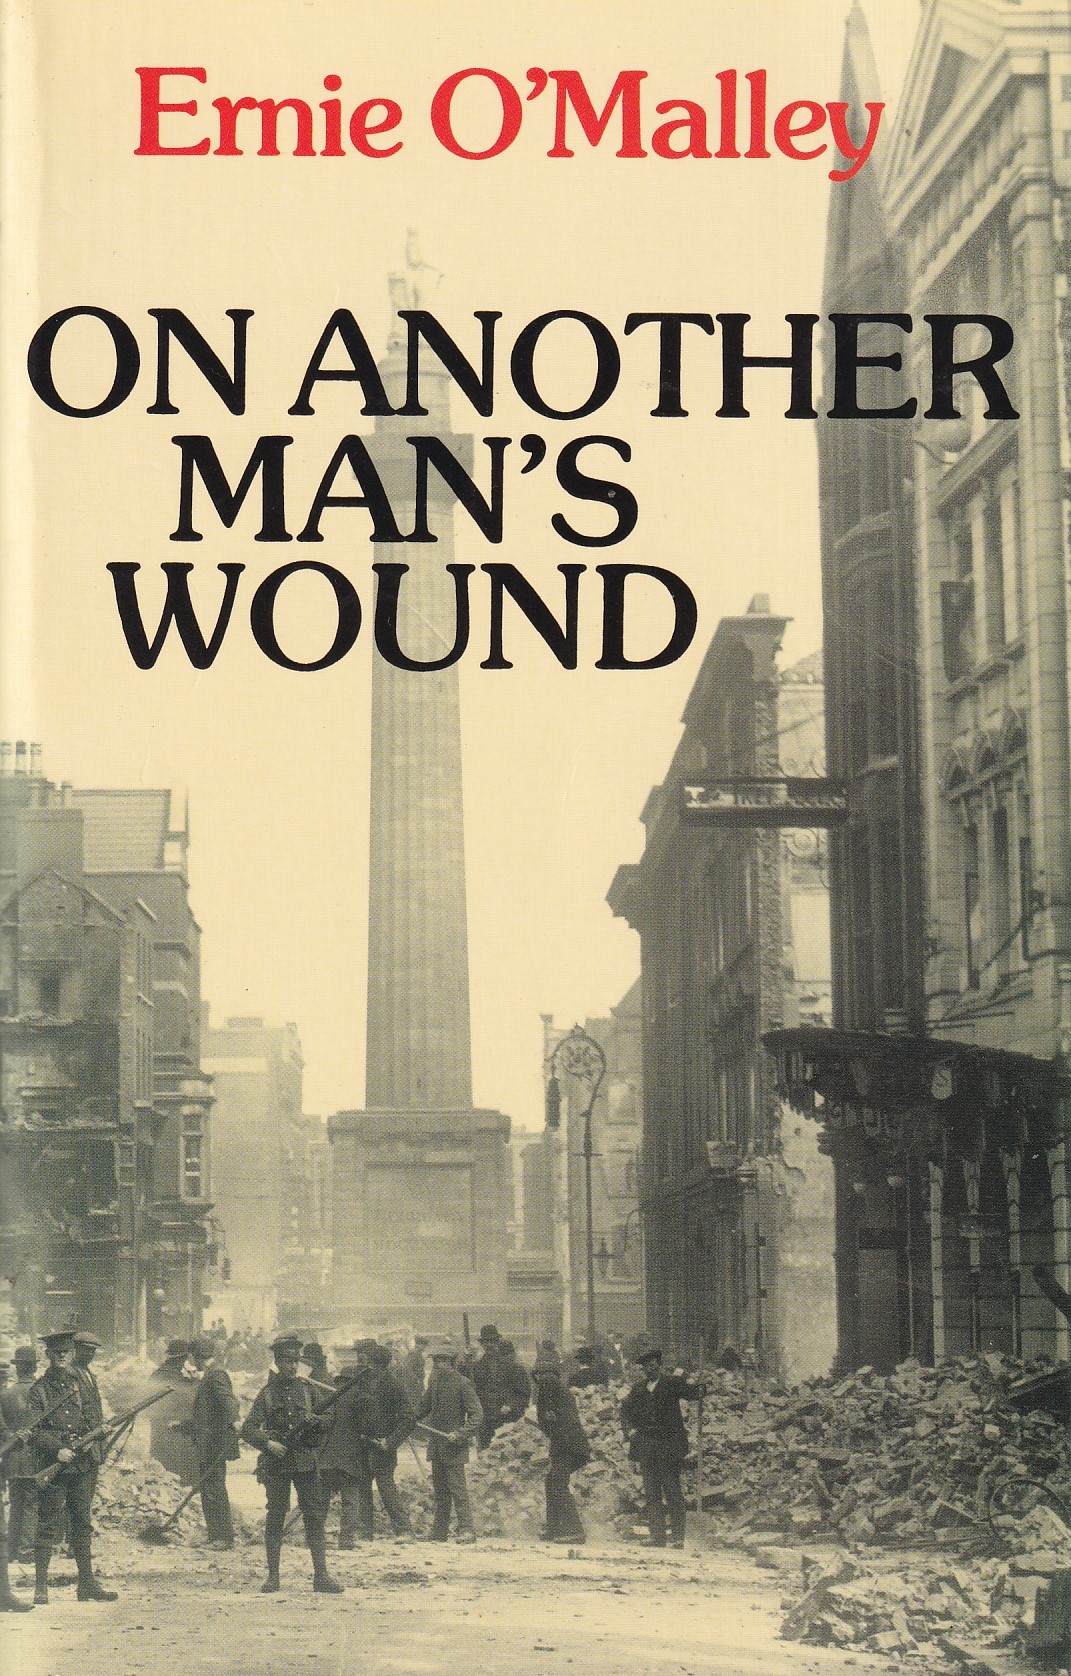 On Another Man’s Wound | Ernie O'Malley | Charlie Byrne's